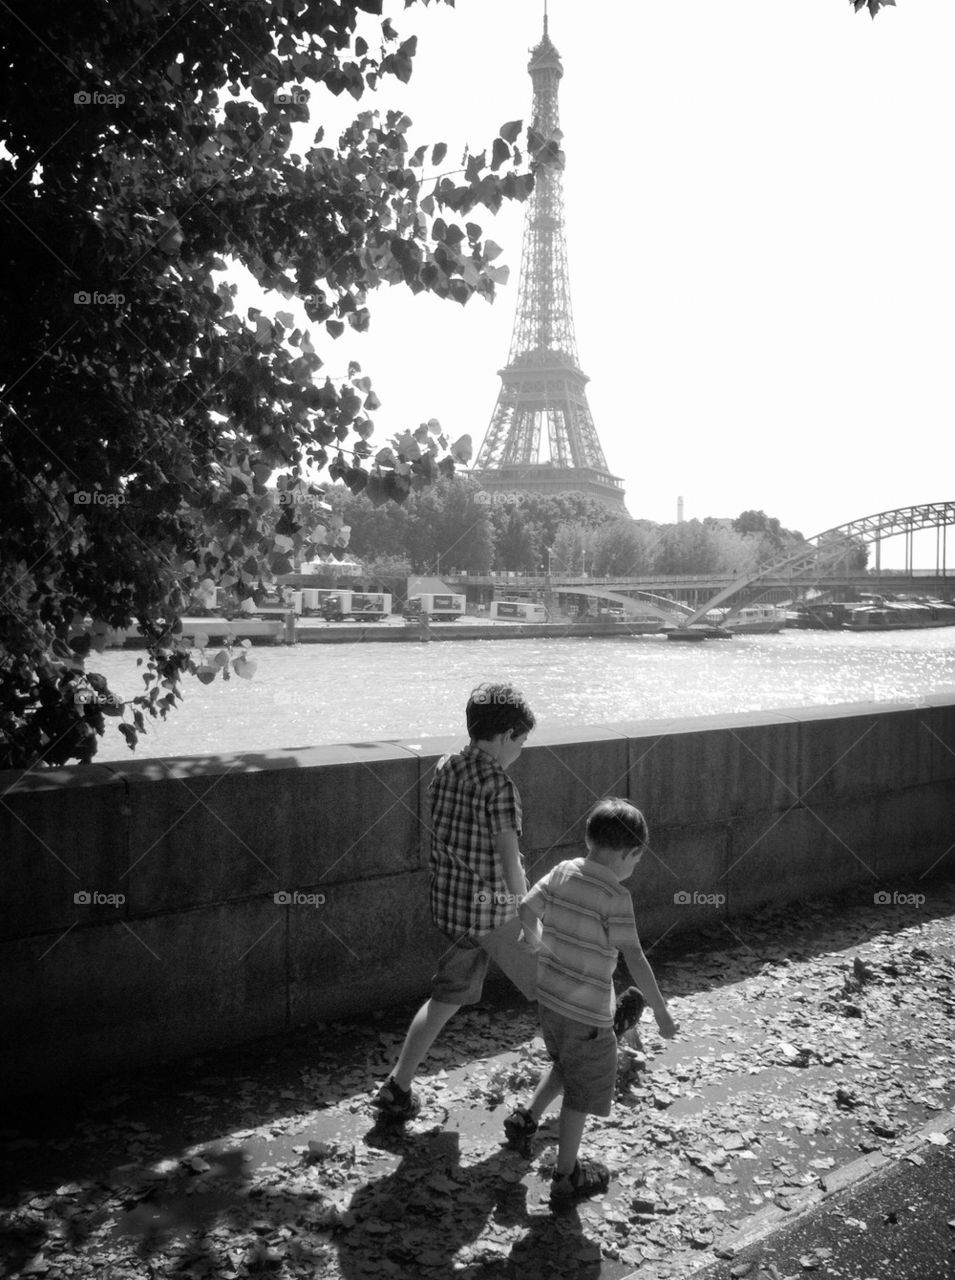 The boys taking a stroll along the Seine